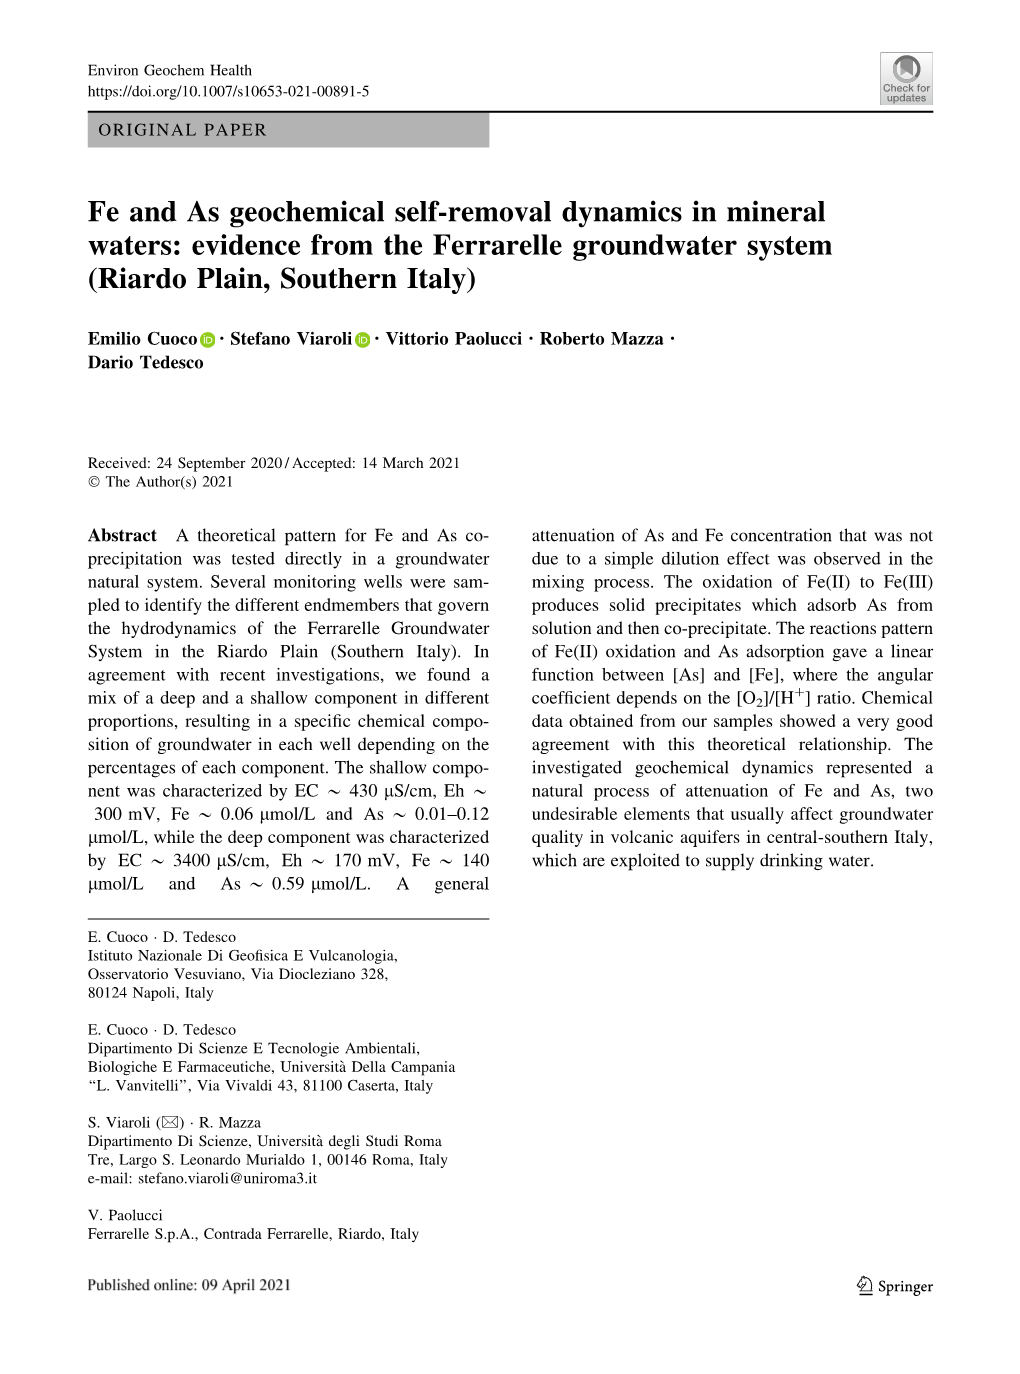 Fe and As Geochemical Self-Removal Dynamics in Mineral Waters: Evidence from the Ferrarelle Groundwater System (Riardo Plain, Southern Italy)